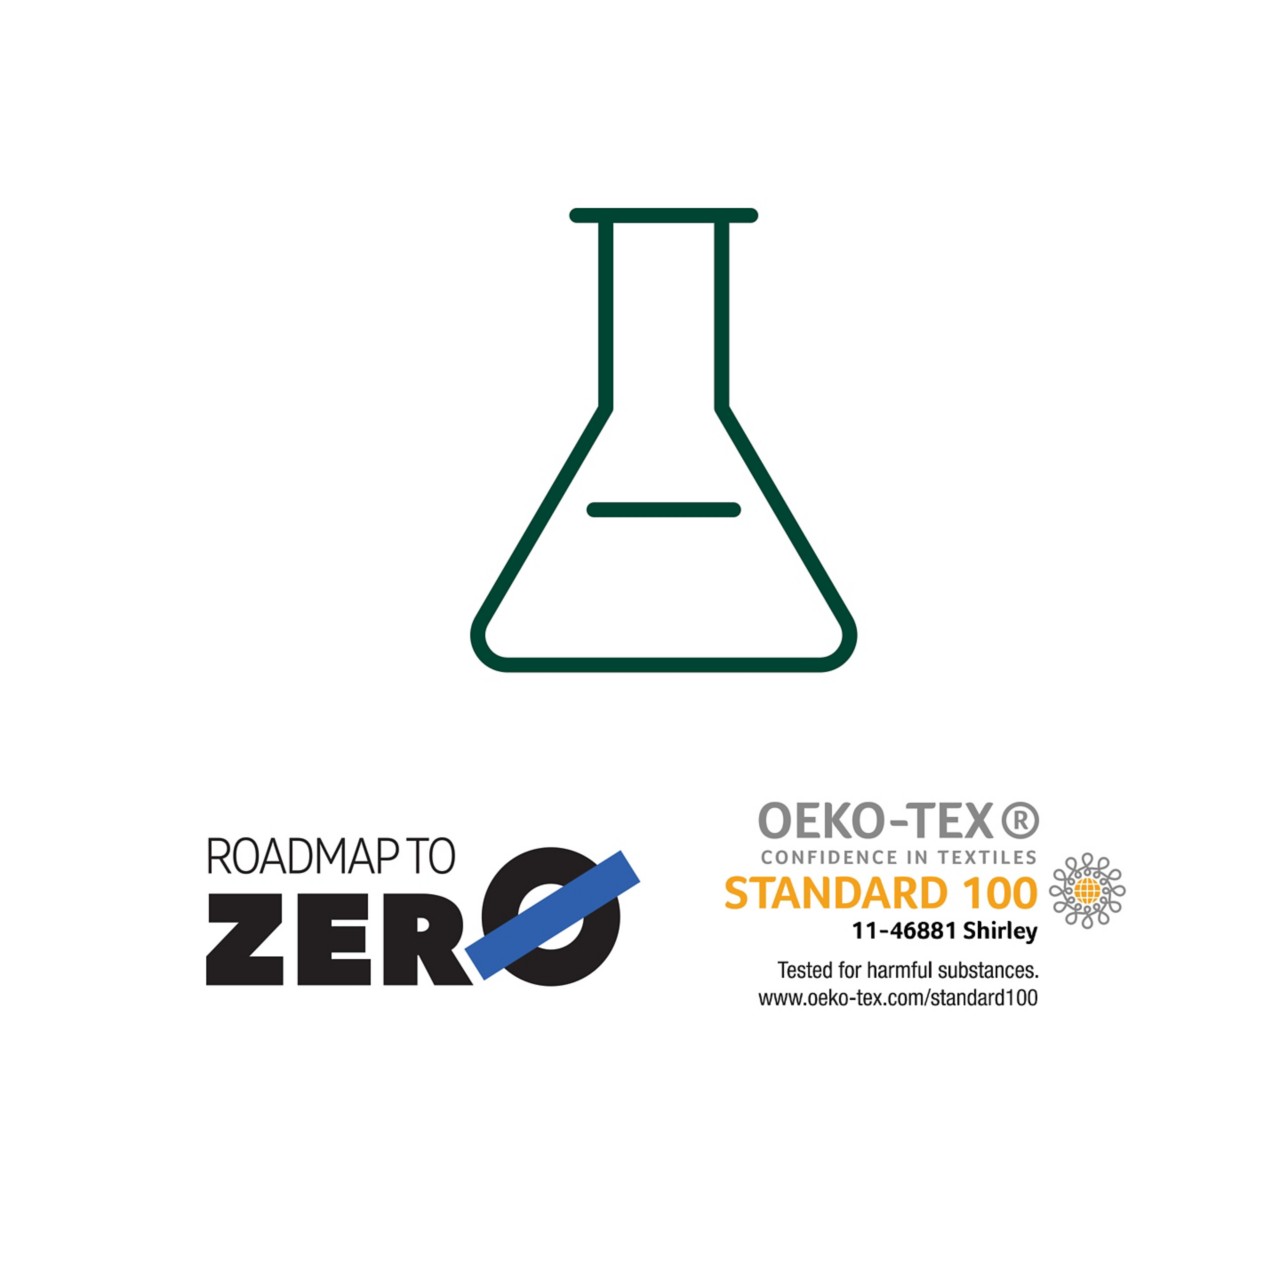 A beaker icon with logos for Roadmap to Zero and OEKO-TEX. 